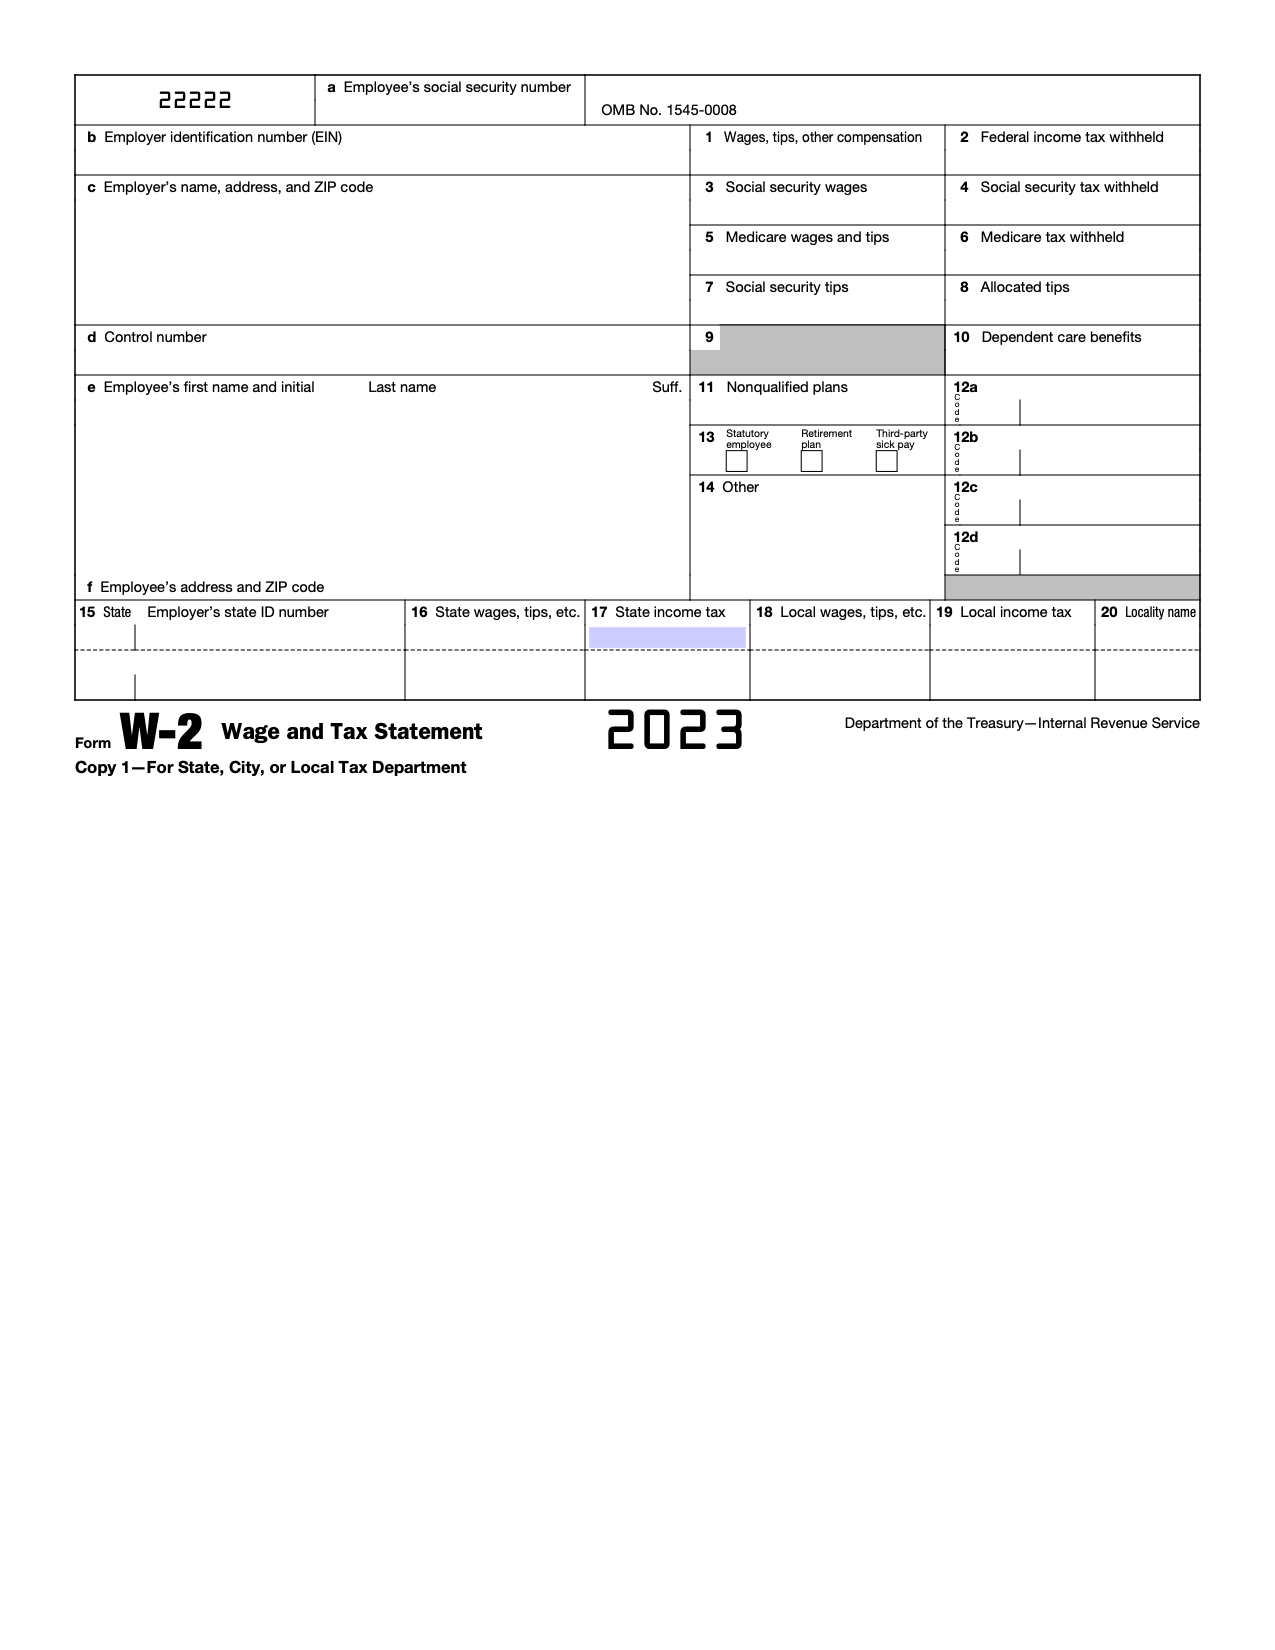 Free Irs Form W-2 | Wage And Tax Statement - Pdf – Eforms pertaining to W2 Form Generator